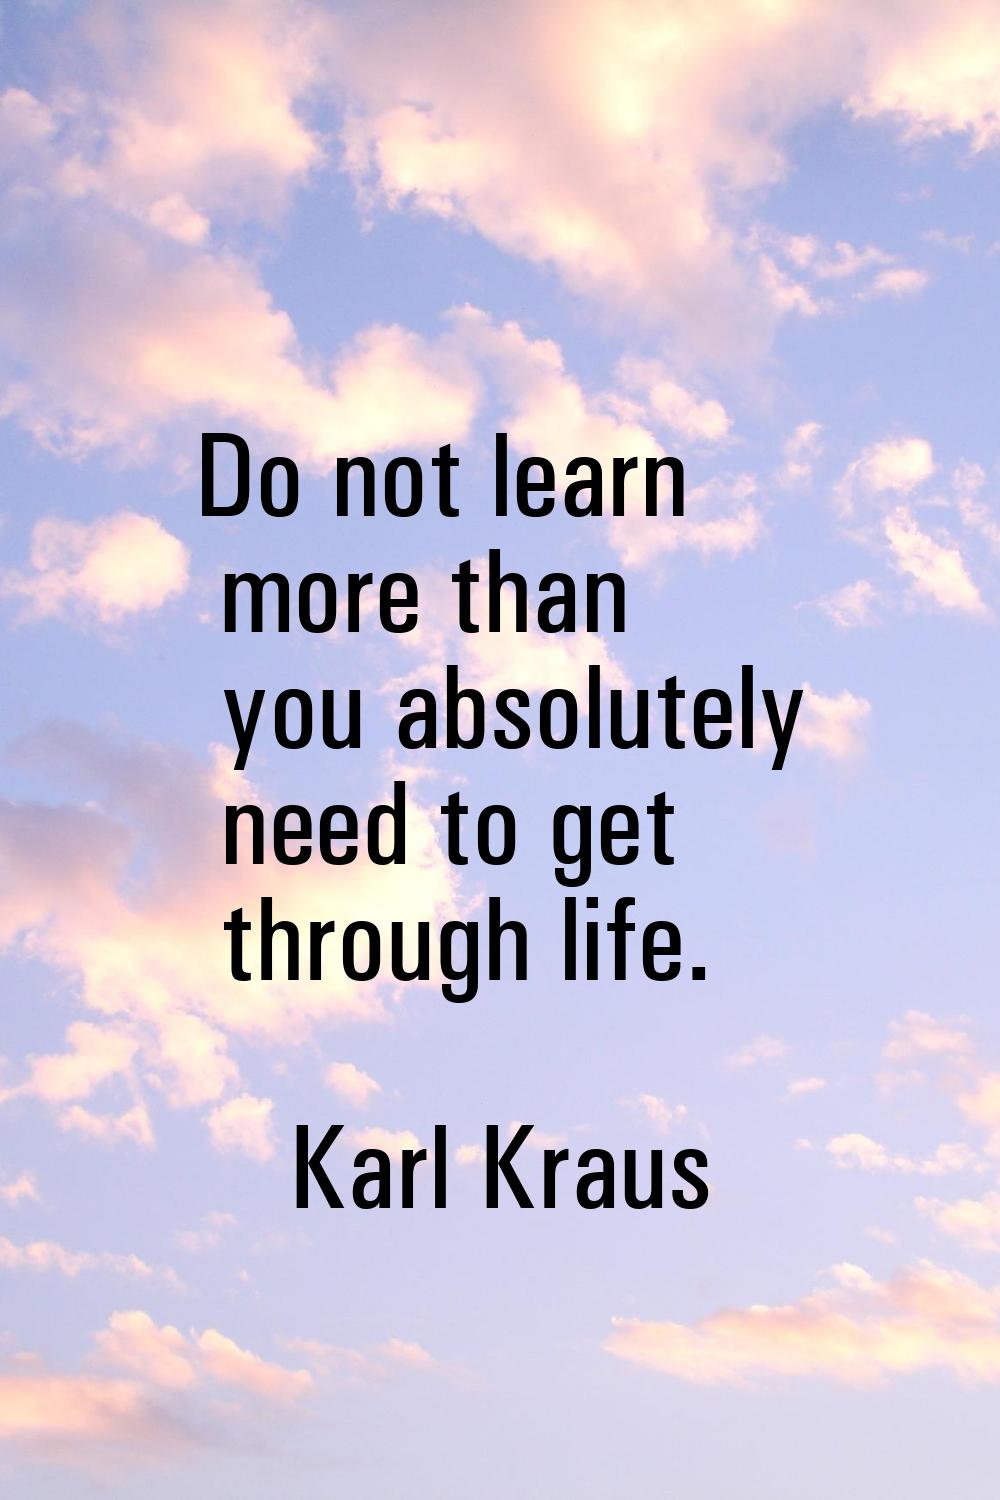 Do not learn more than you absolutely need to get through life.